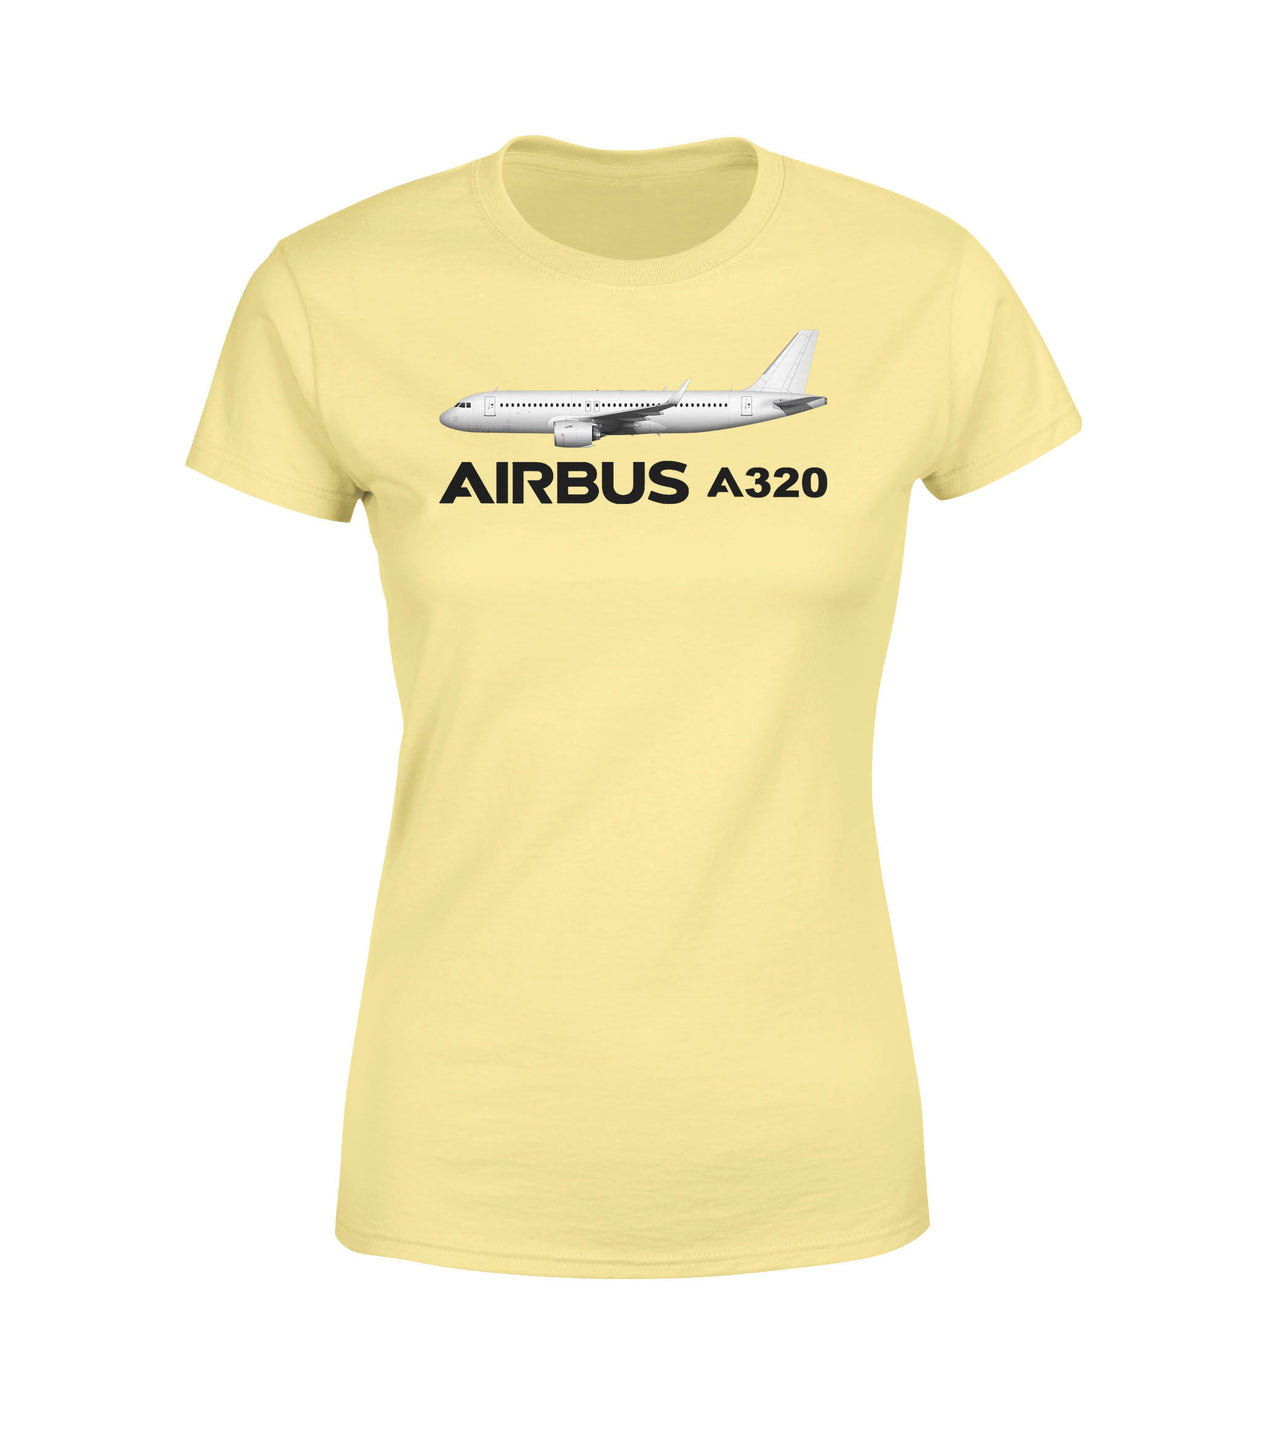 The Airbus A320 Designed Women T-Shirts